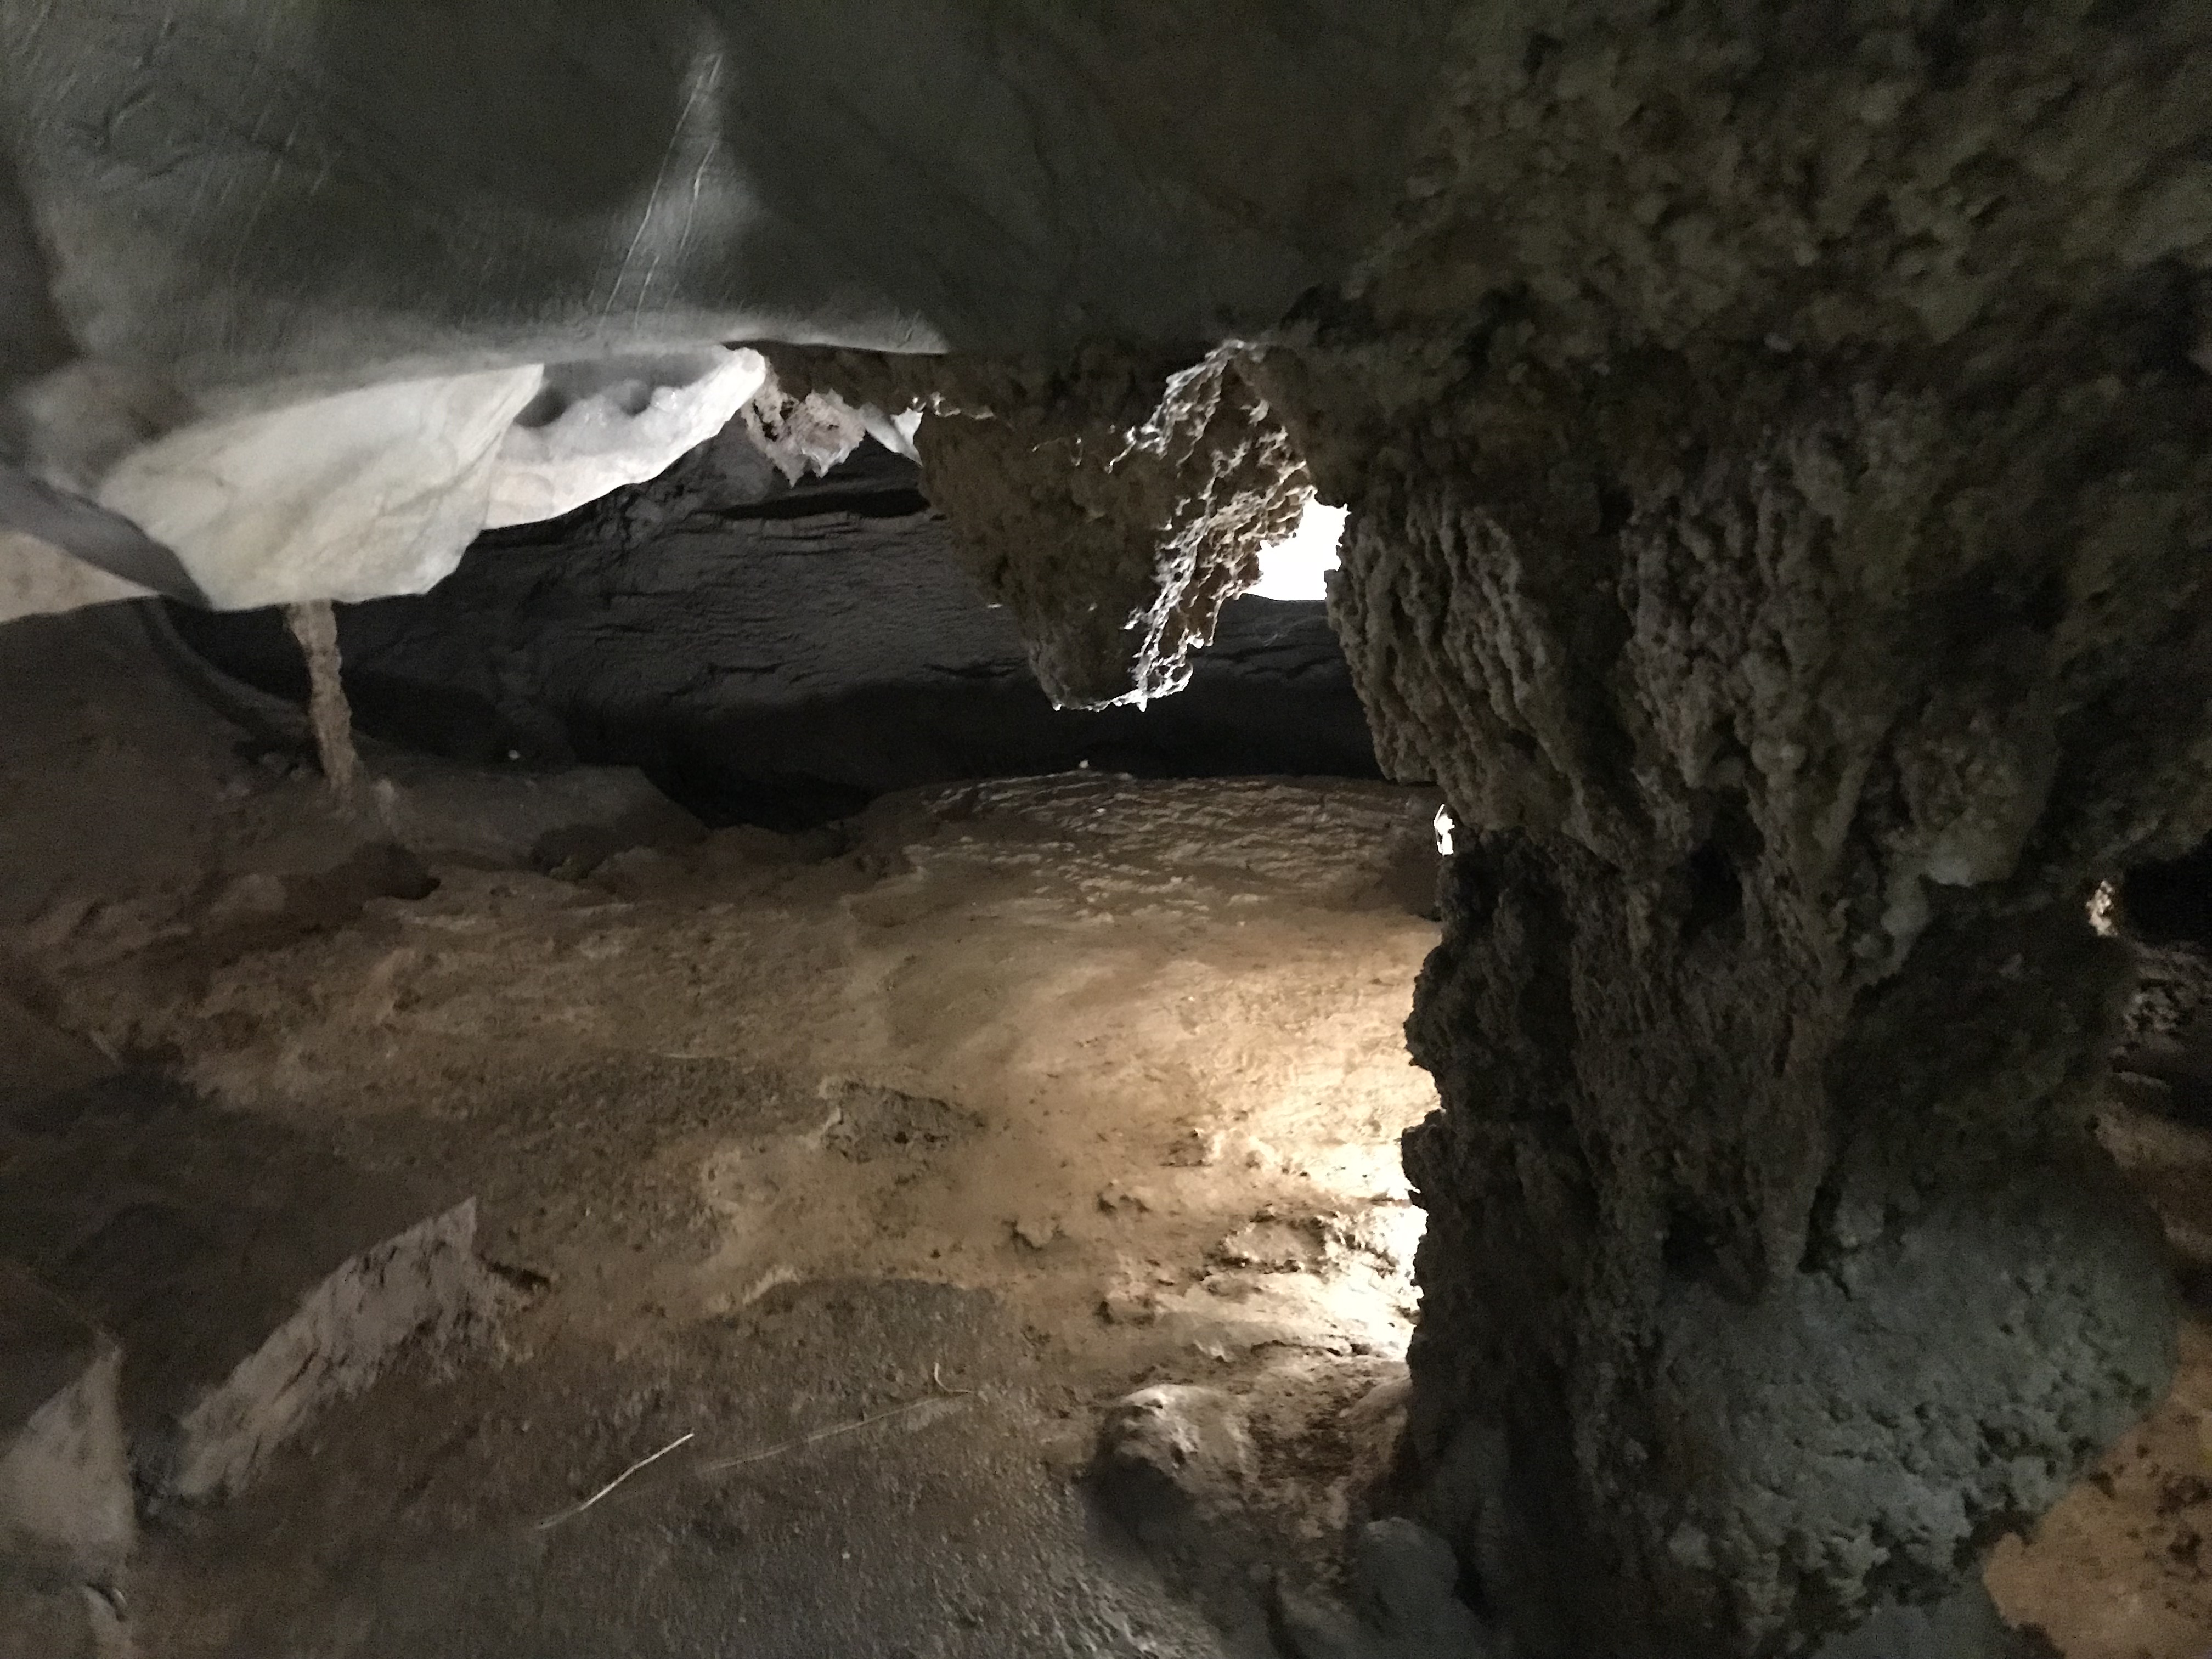 Indian Cave